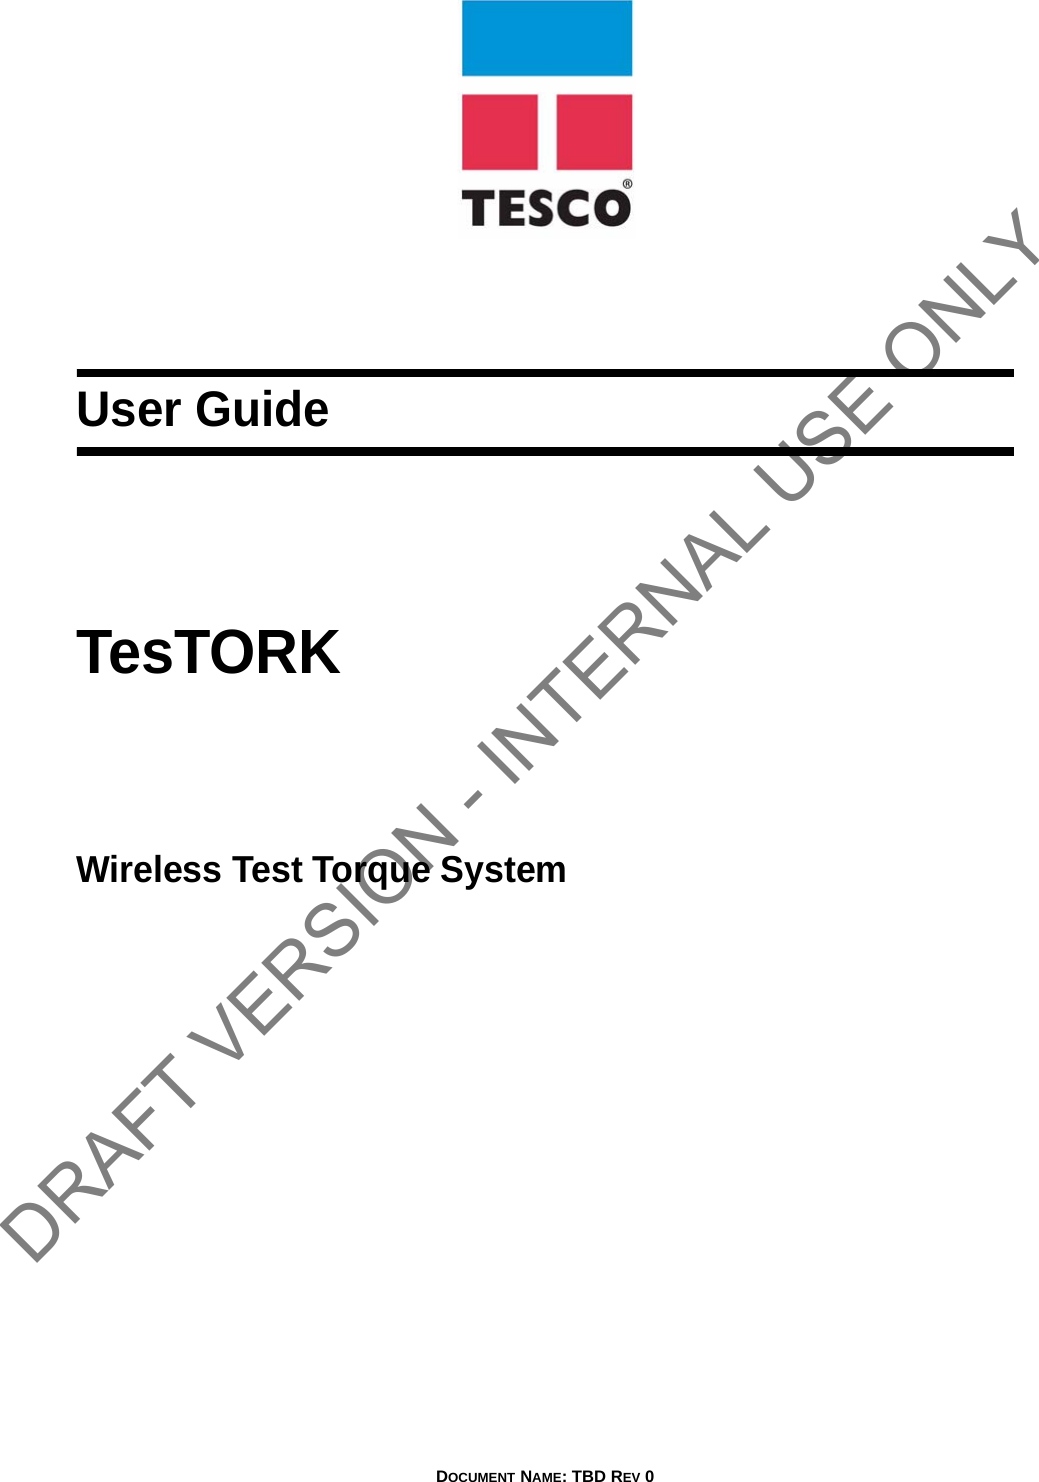 DOCUMENT NAME: TBD REV 0User GuideTesTORKWireless Test Torque SystemDRAFT VERSION - INTERNAL USE ONLY